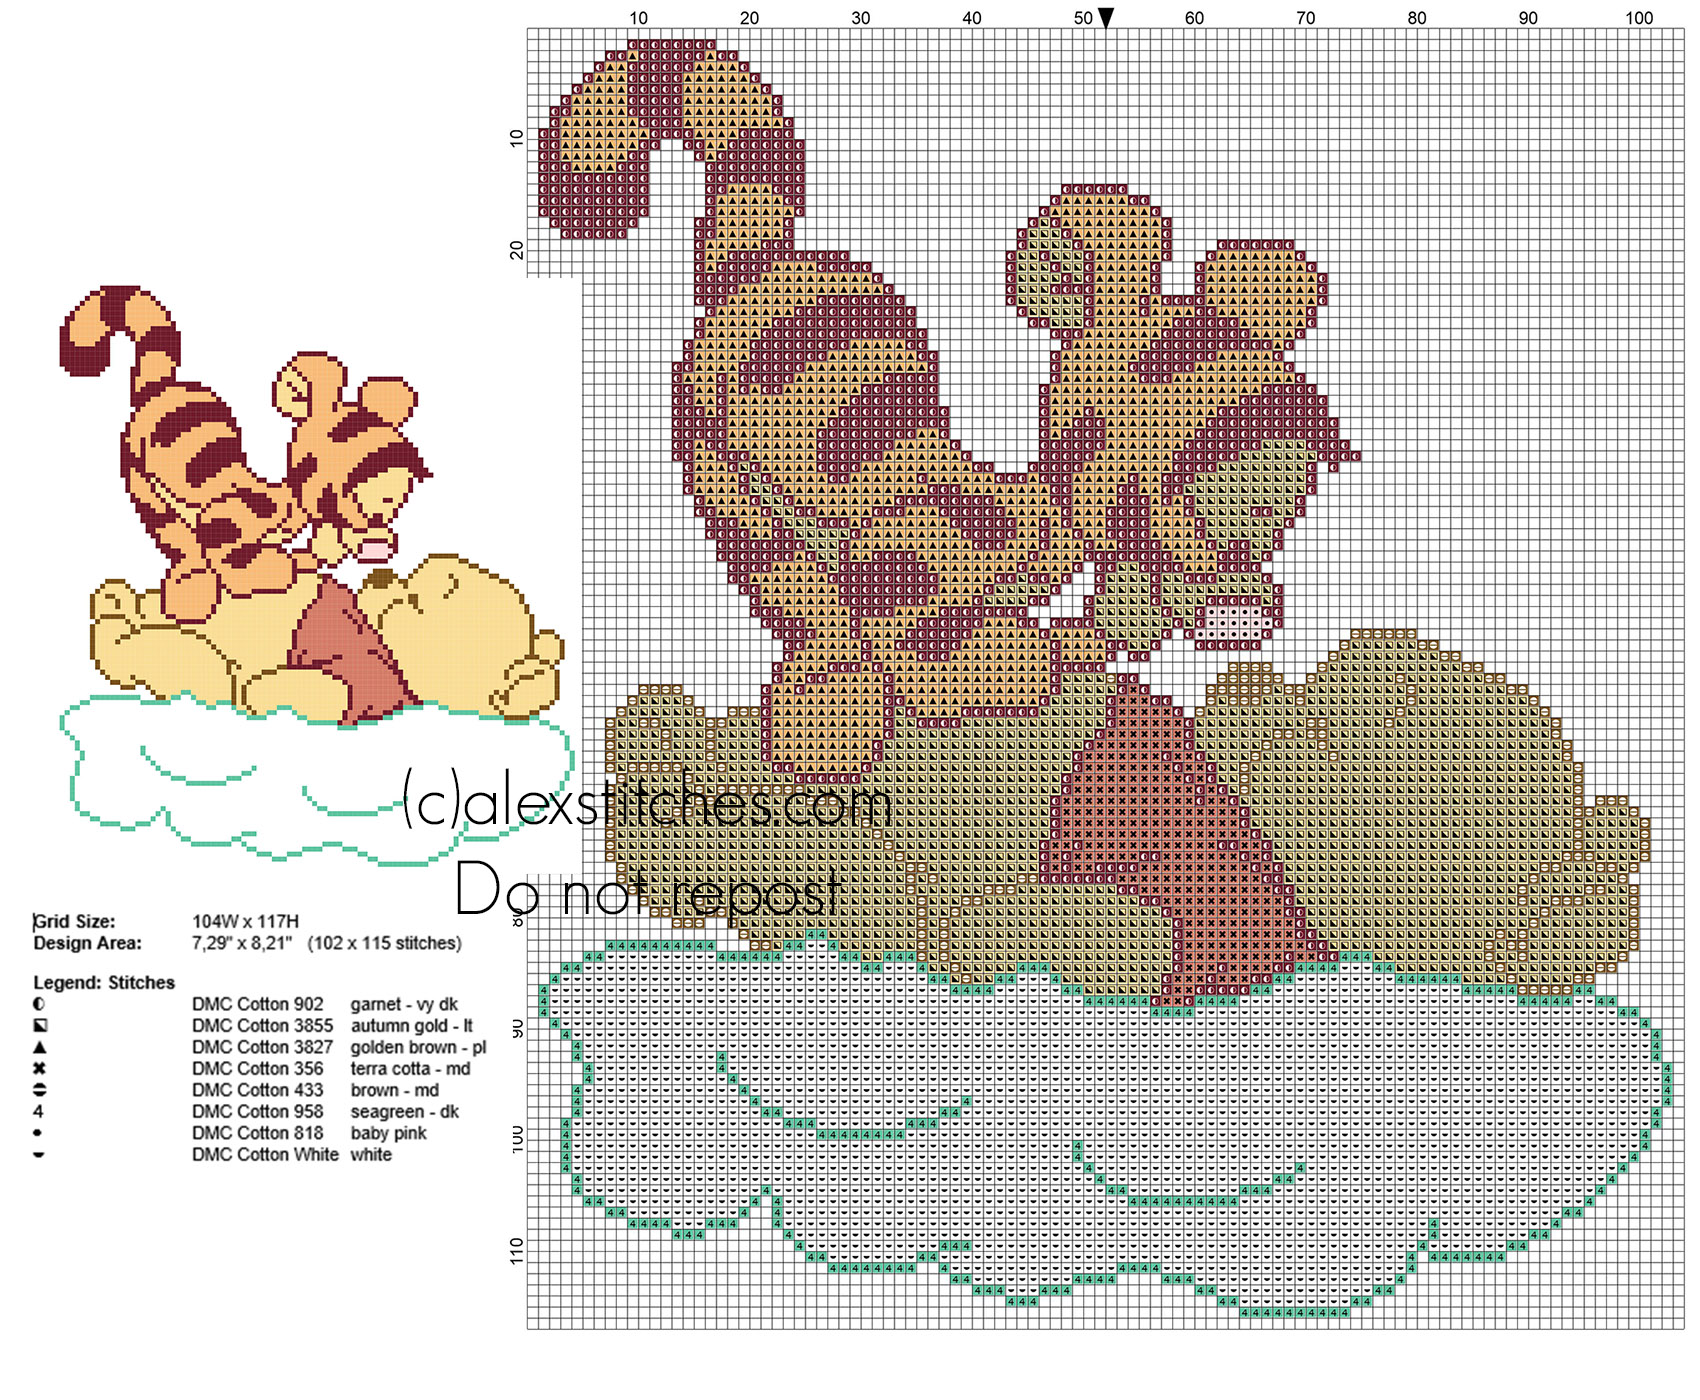 Baby Winnie The Pooh and baby Tiger on the clouds cross stitch pattern